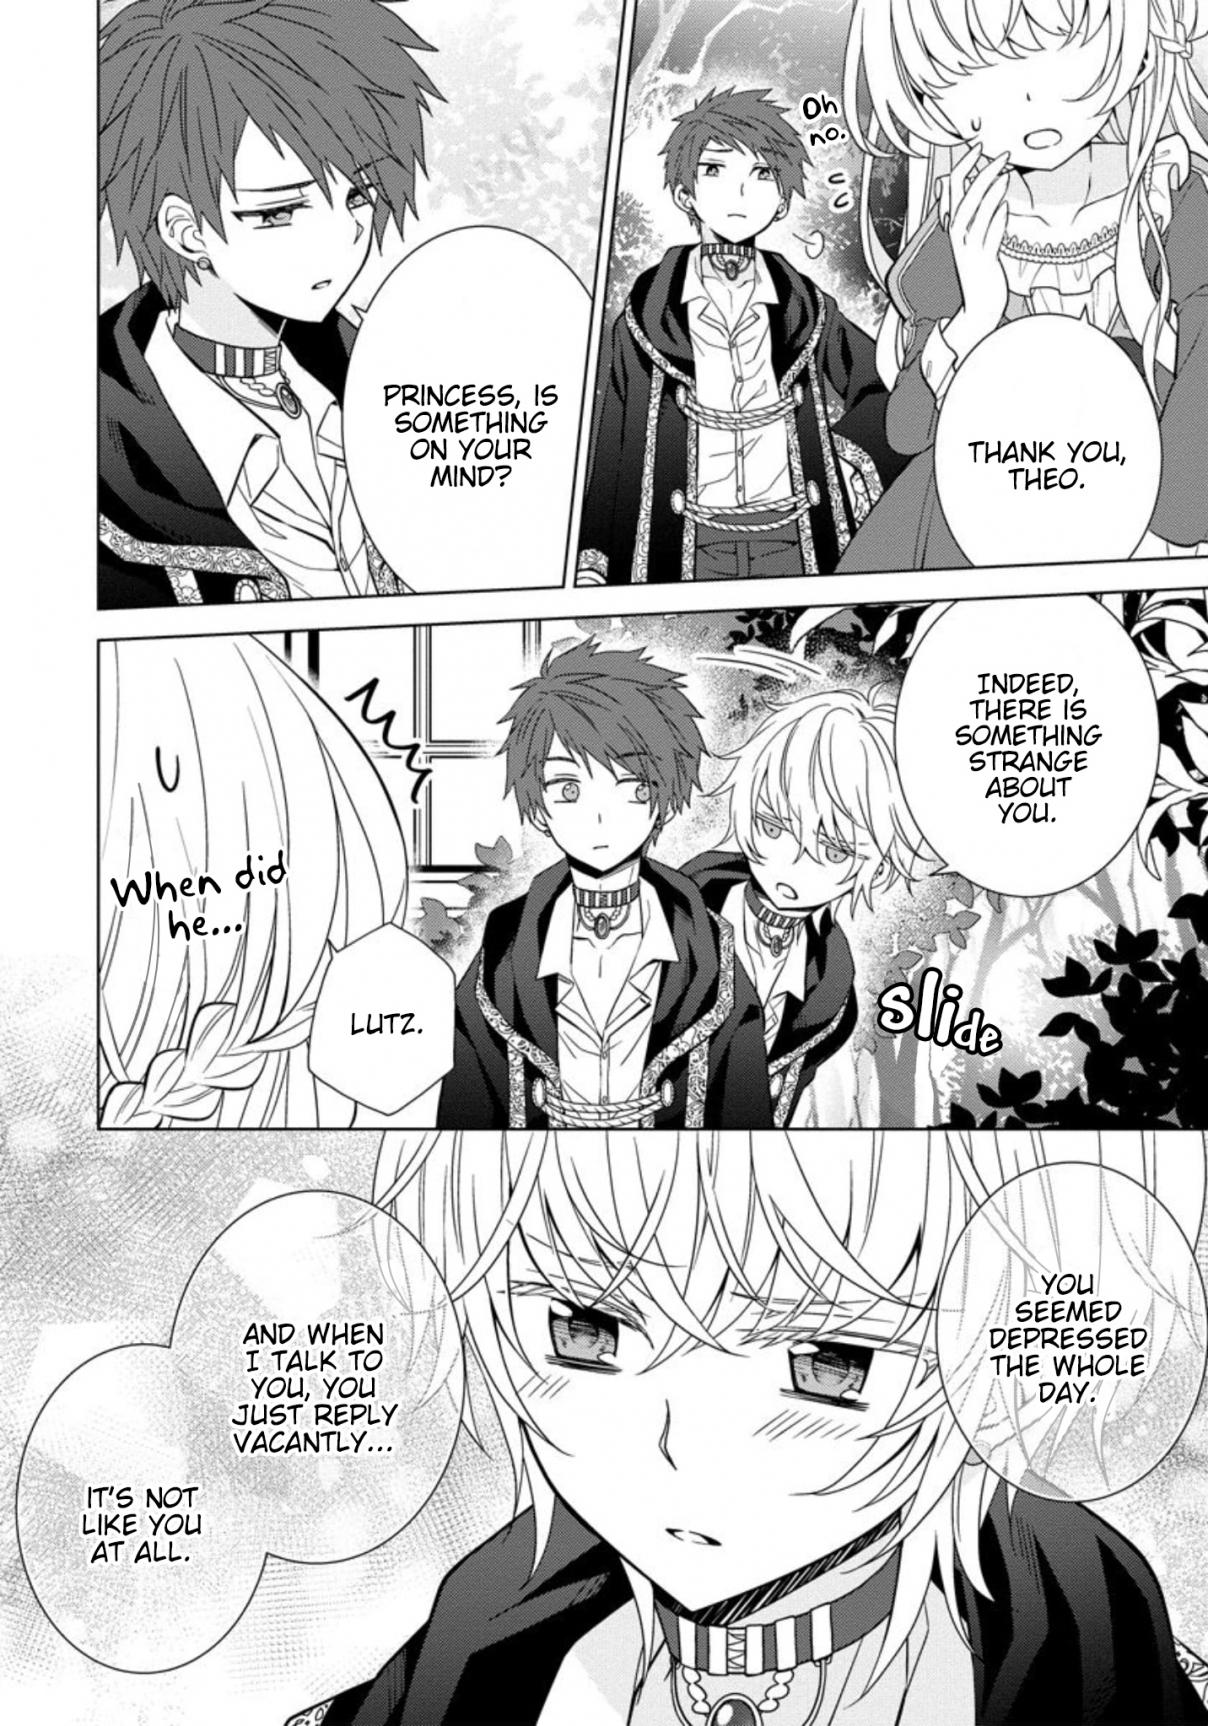 The Reincarnated Princess Strikes Down Flags Today as Well Vol. 1 Ch. 7